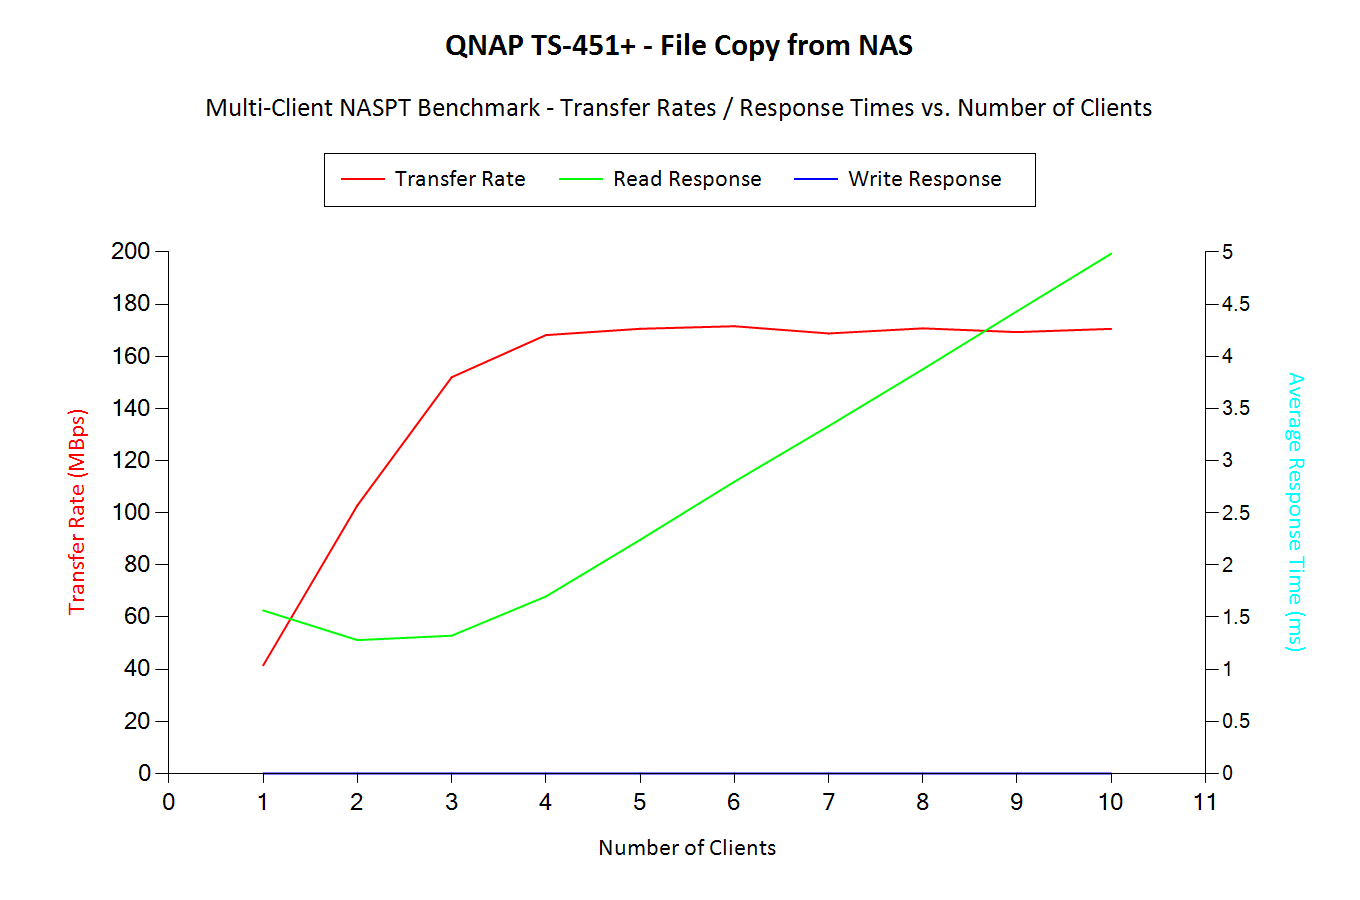 File Copy from NAS - Multi-Client Benchmark